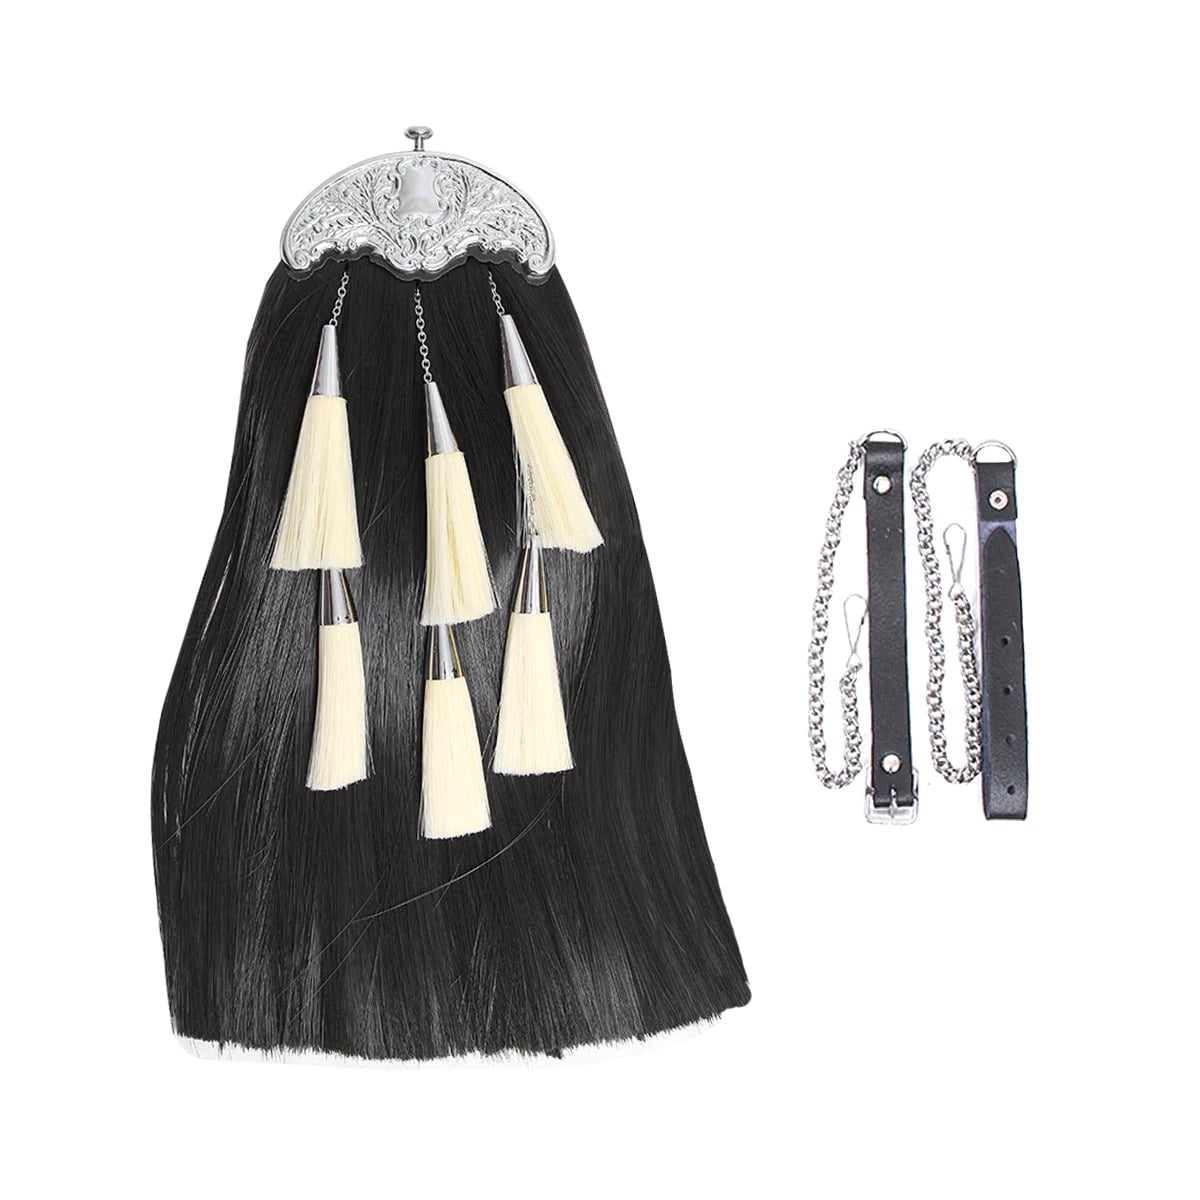 Synthetic Long Hairs Sporran Black Color Body With 5 White Color Tassels - Imperial Highland Supplies